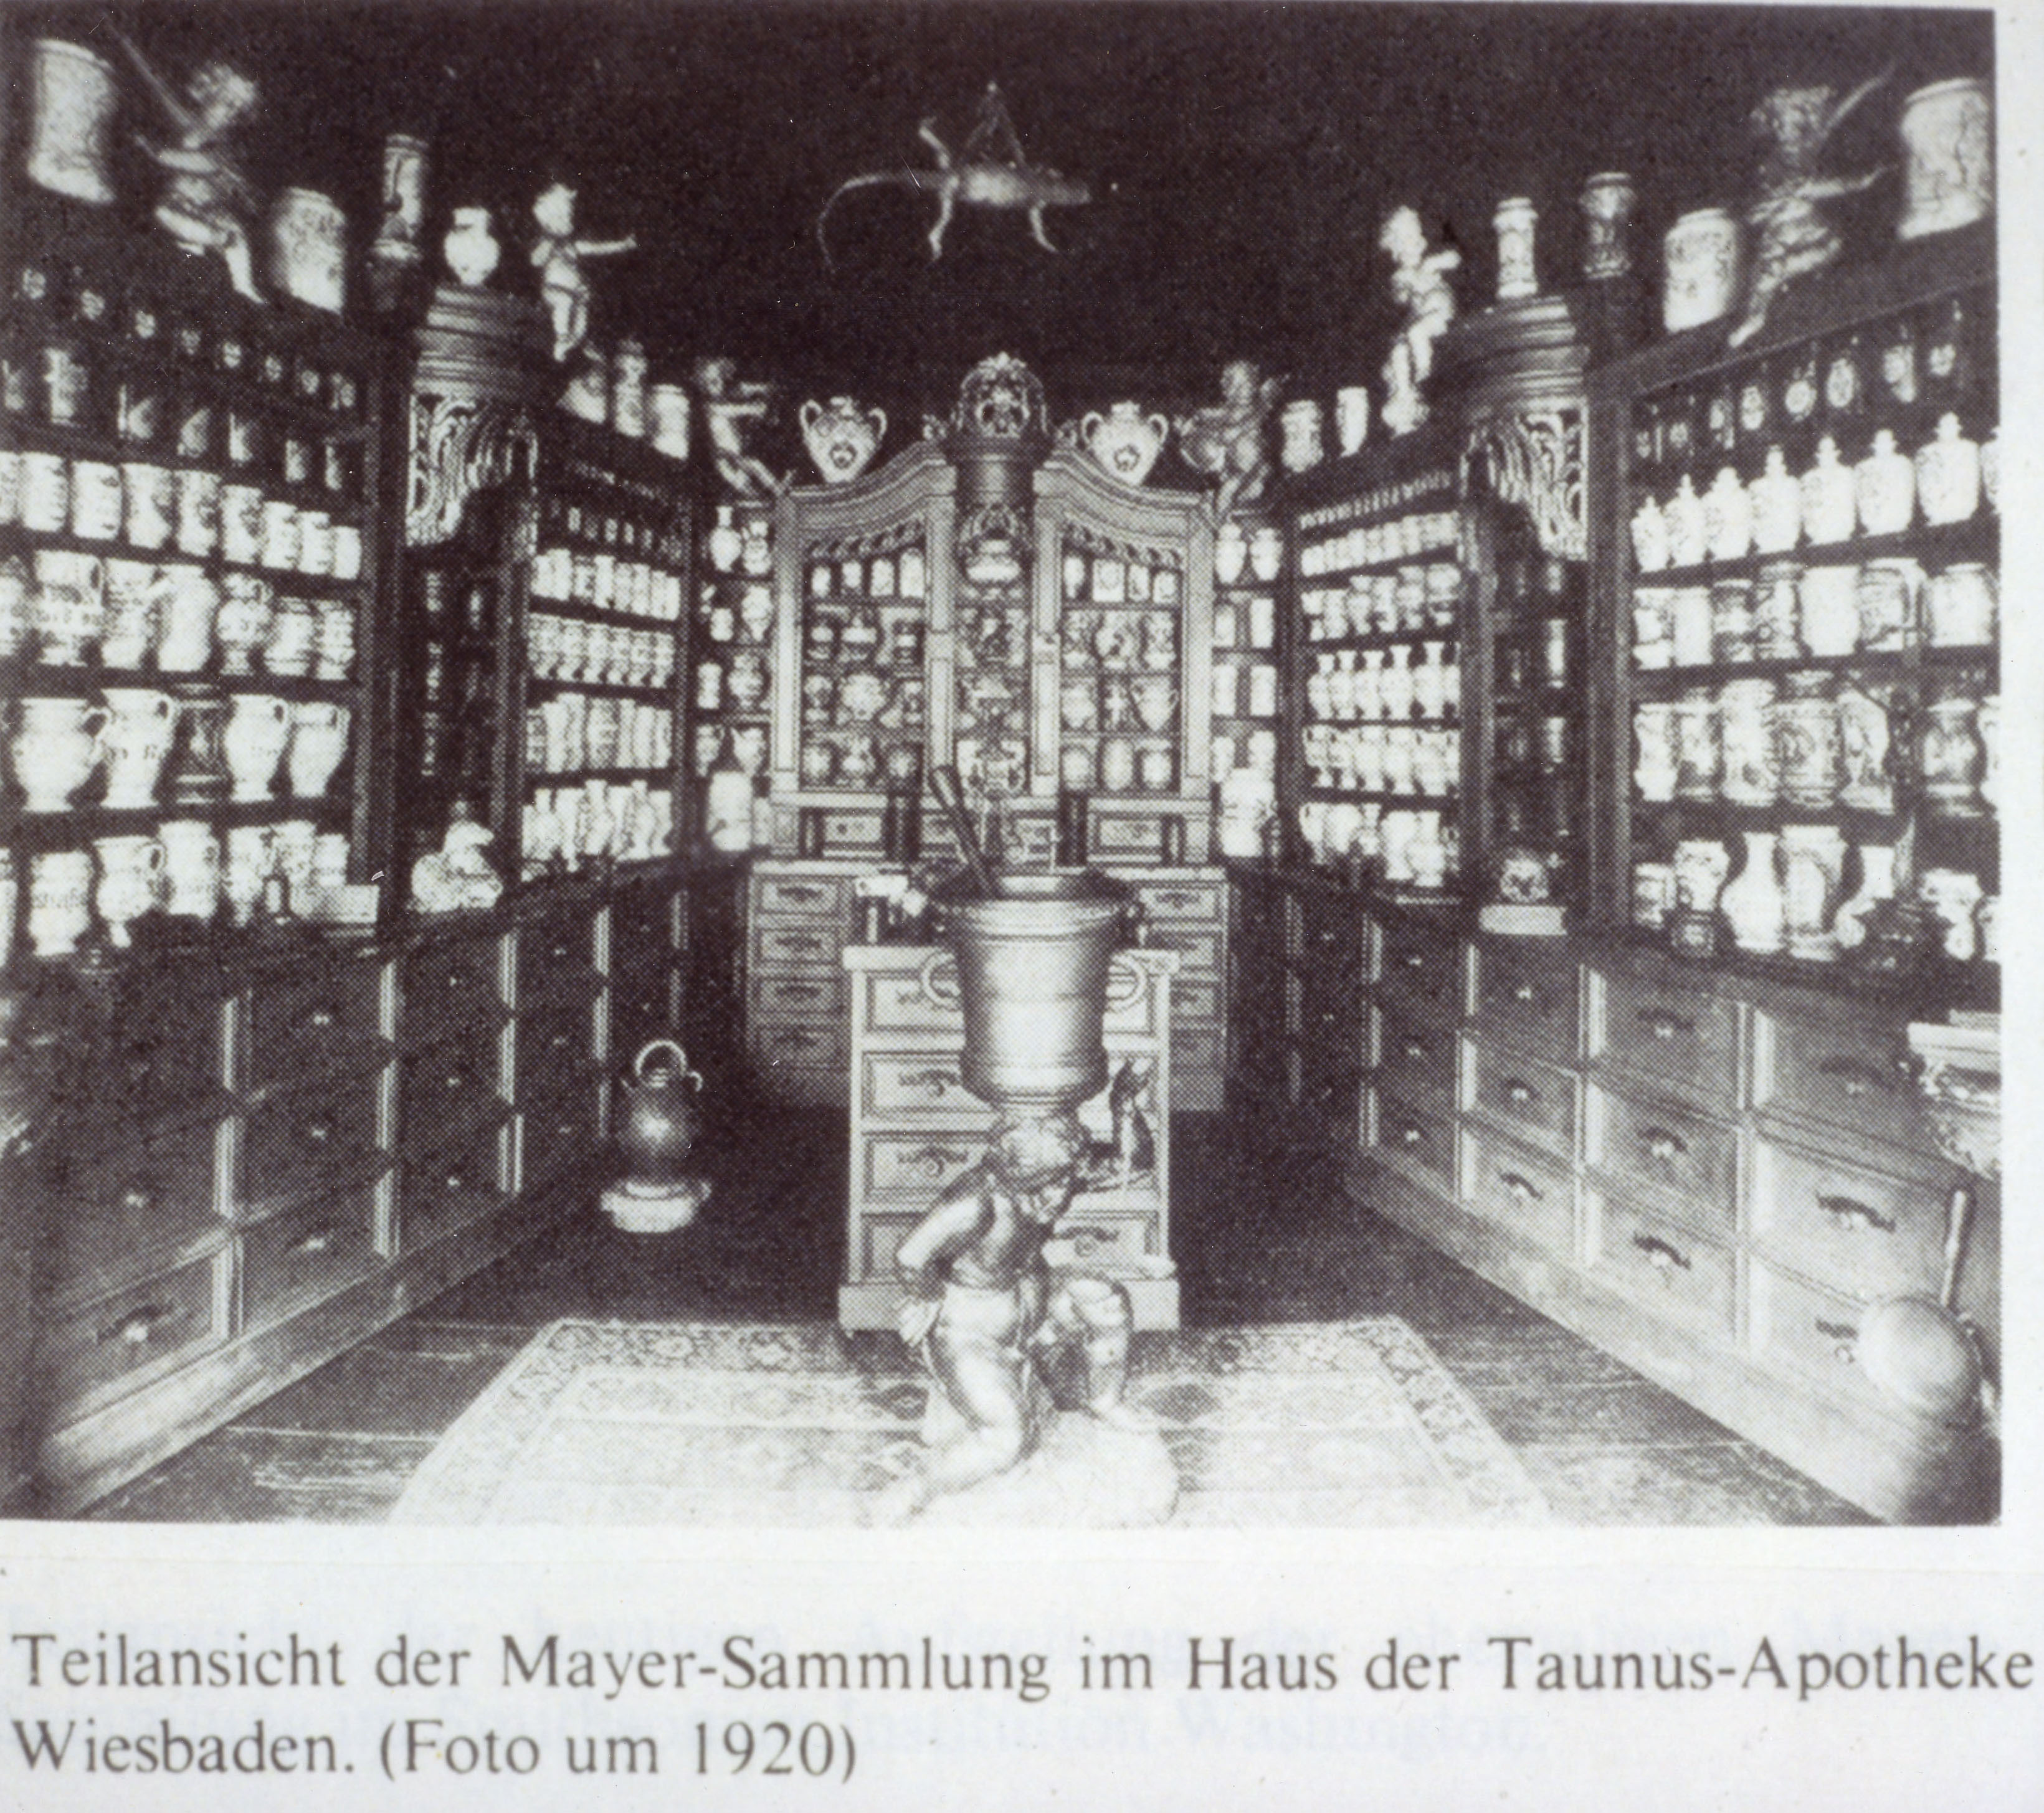 Partial view of the Mayer Collection at the House of Taunus pharmacy Wiesbaden circa 1920